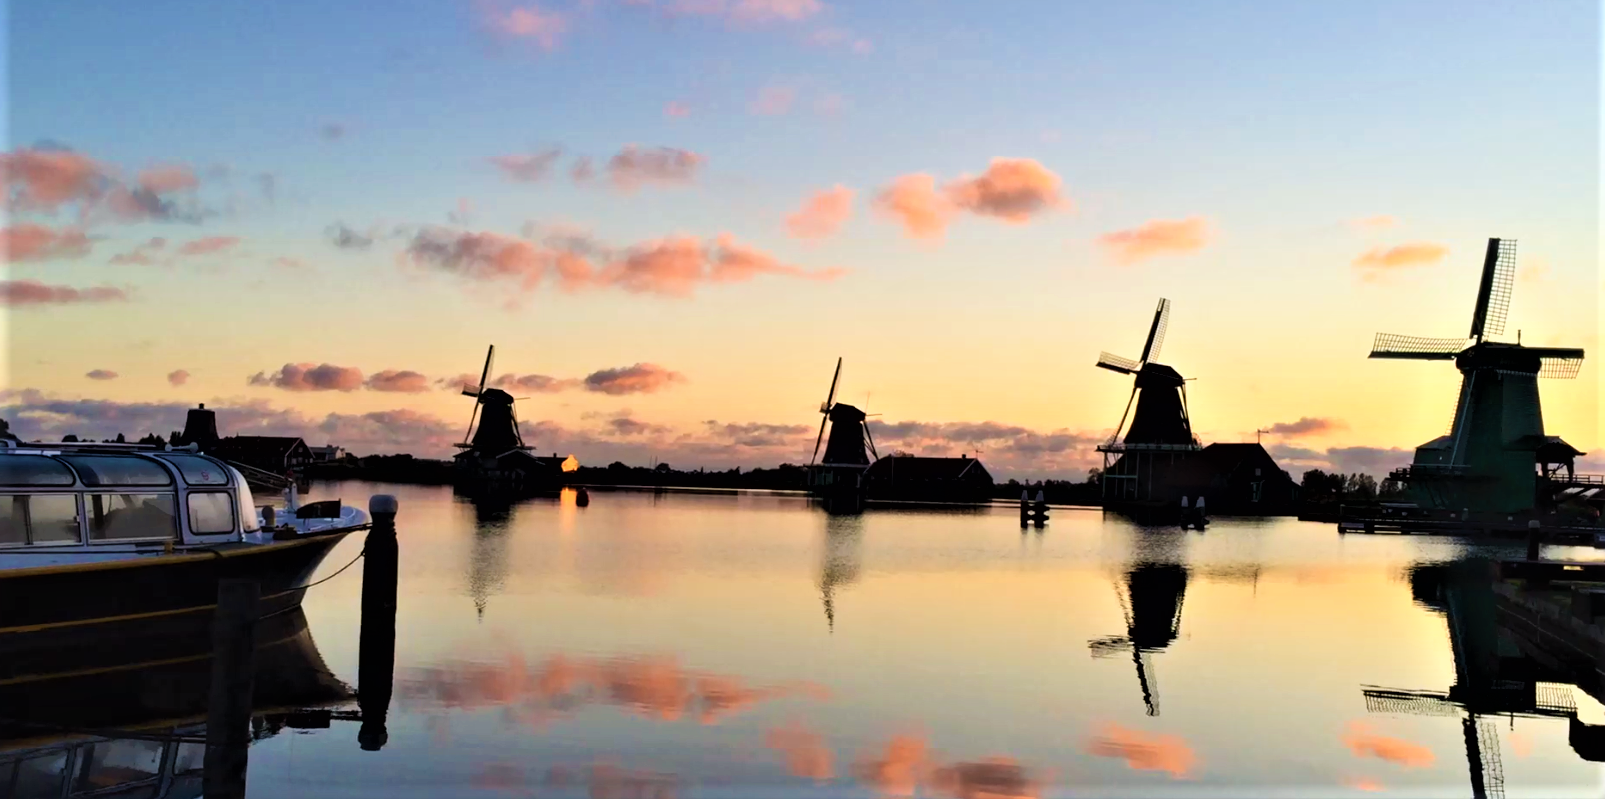 One-day-in-Zaanse-Schans-complete-travel-guide